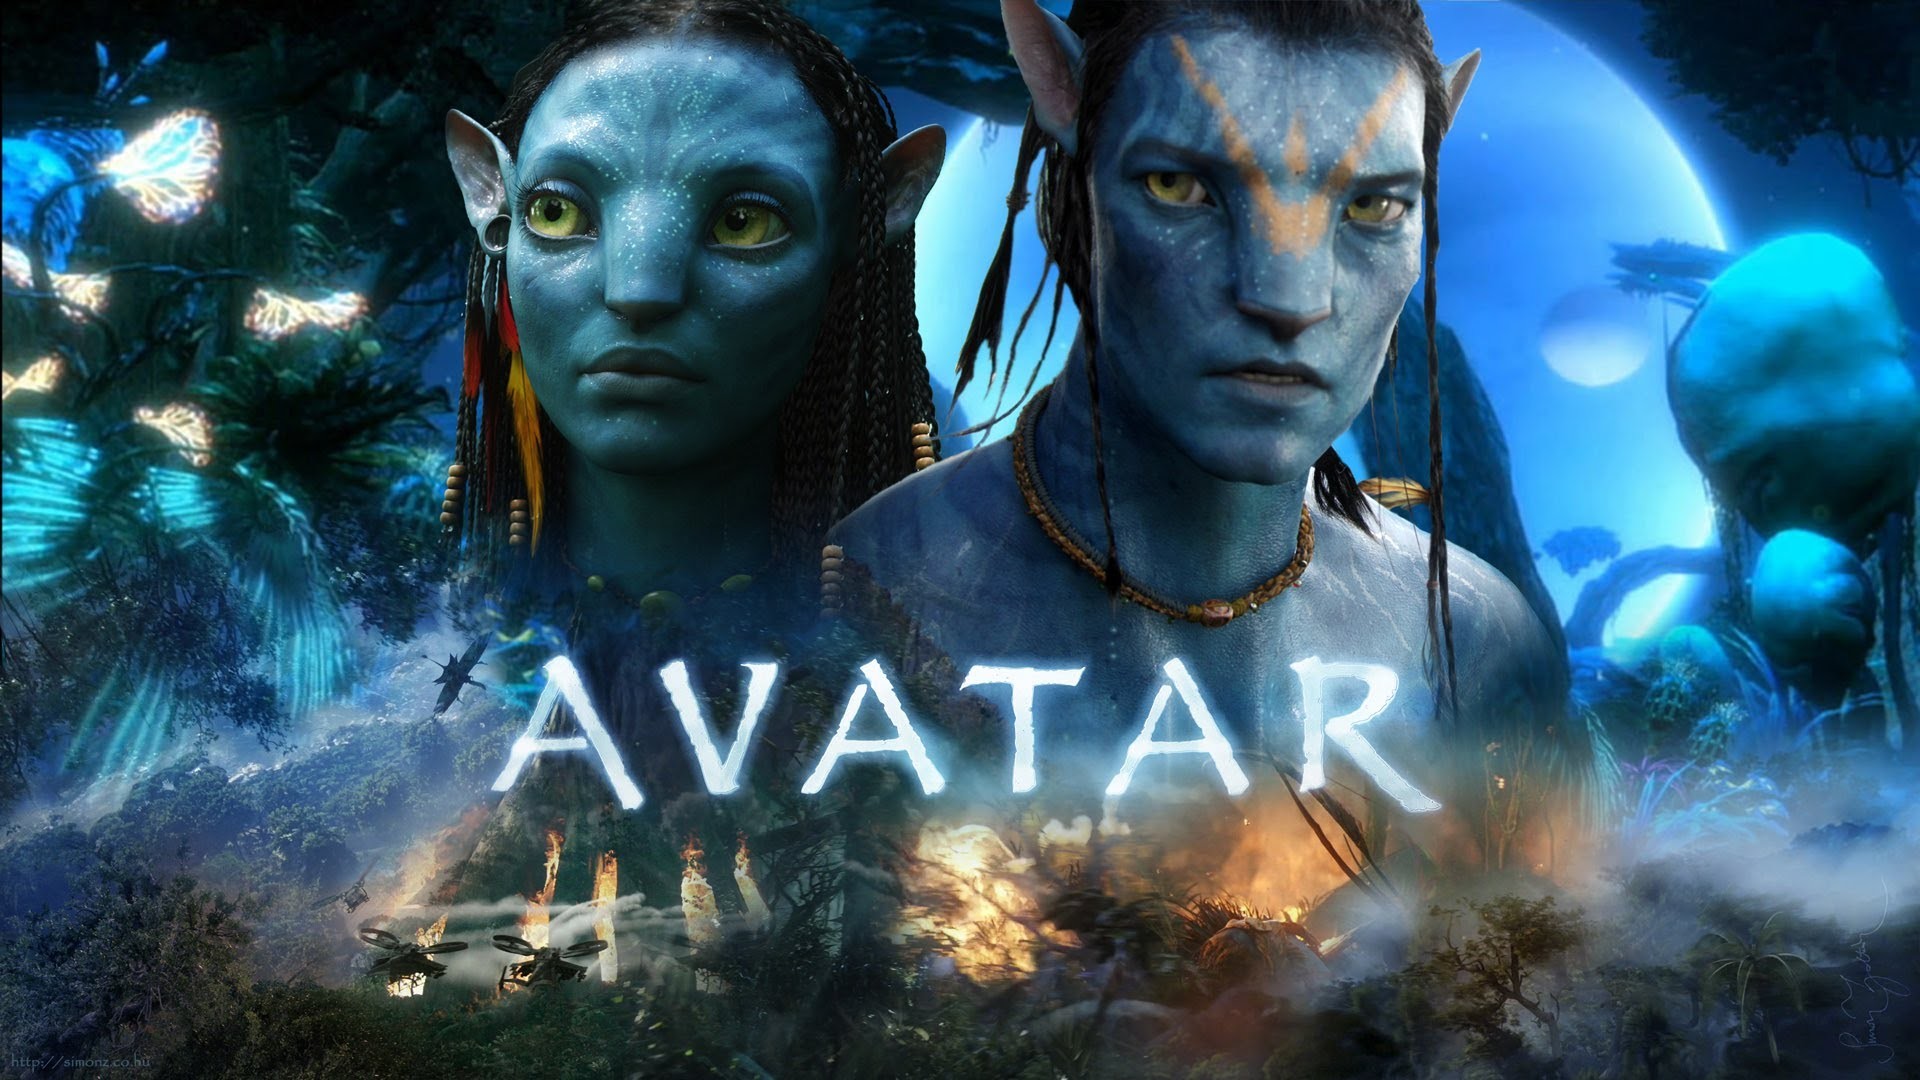 Avatar The Way of Water Wallpaper 4K HD PC 851h